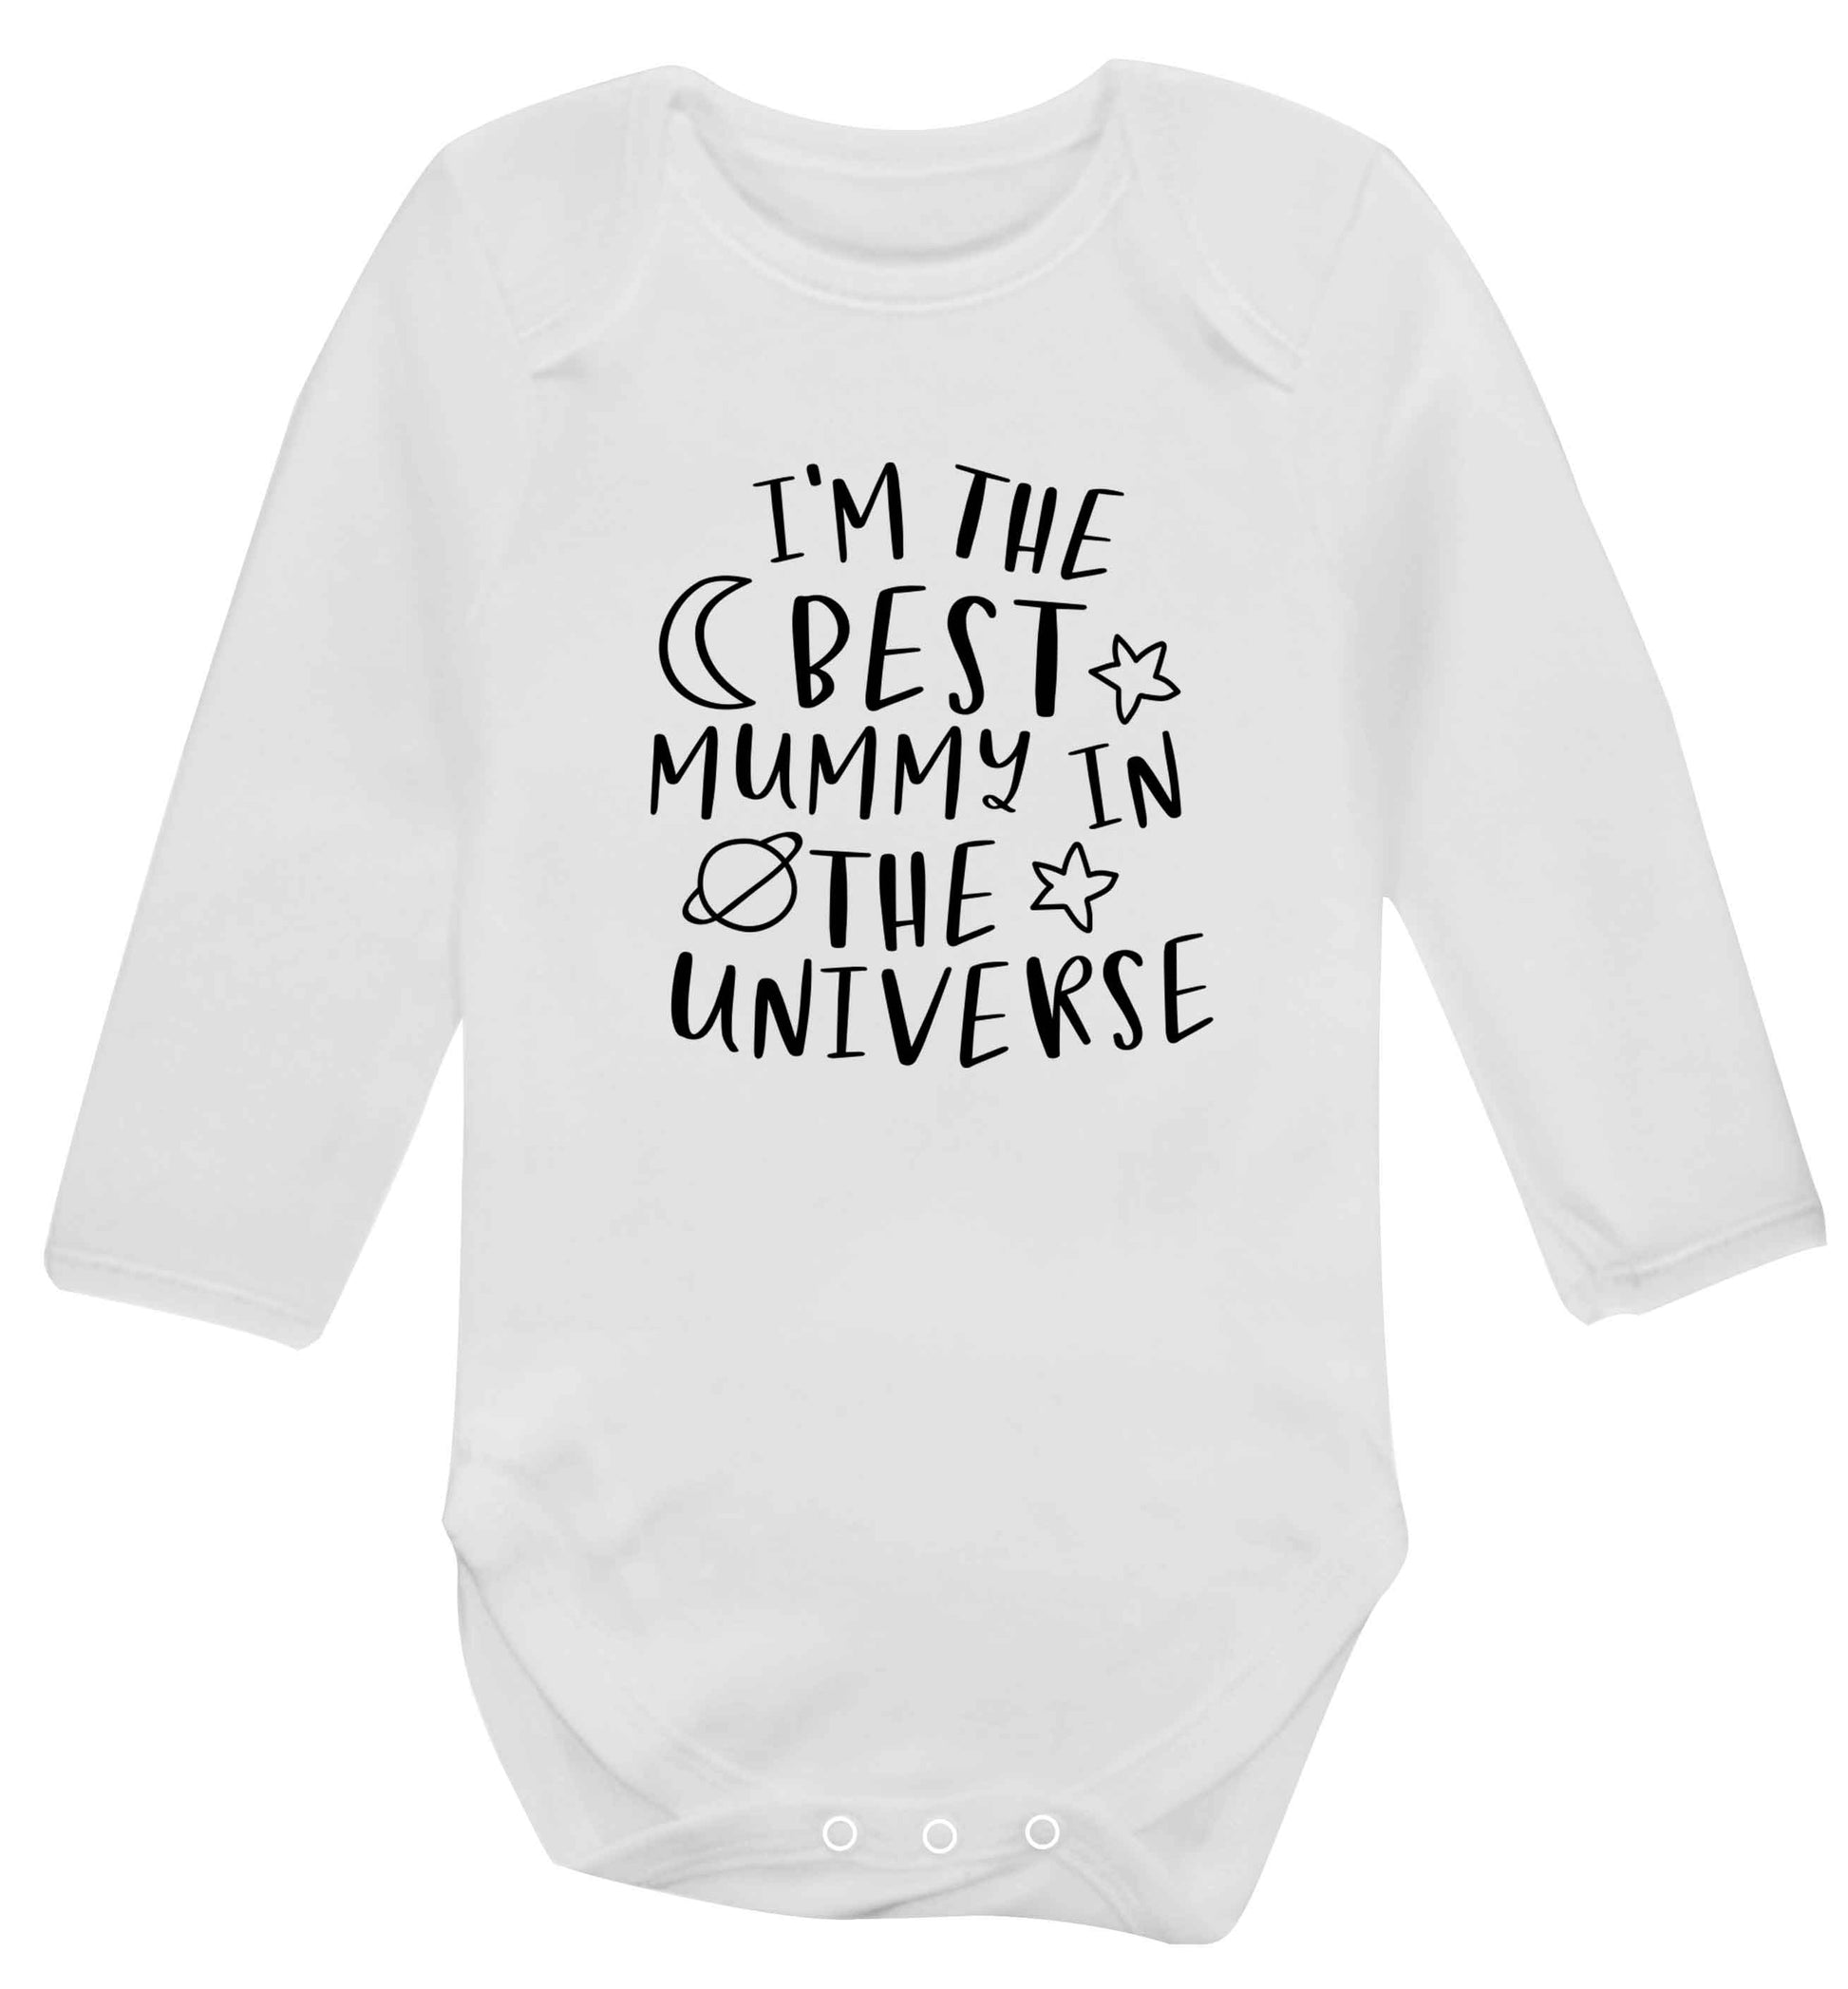 I'm the best mummy in the universe baby vest long sleeved white 6-12 months